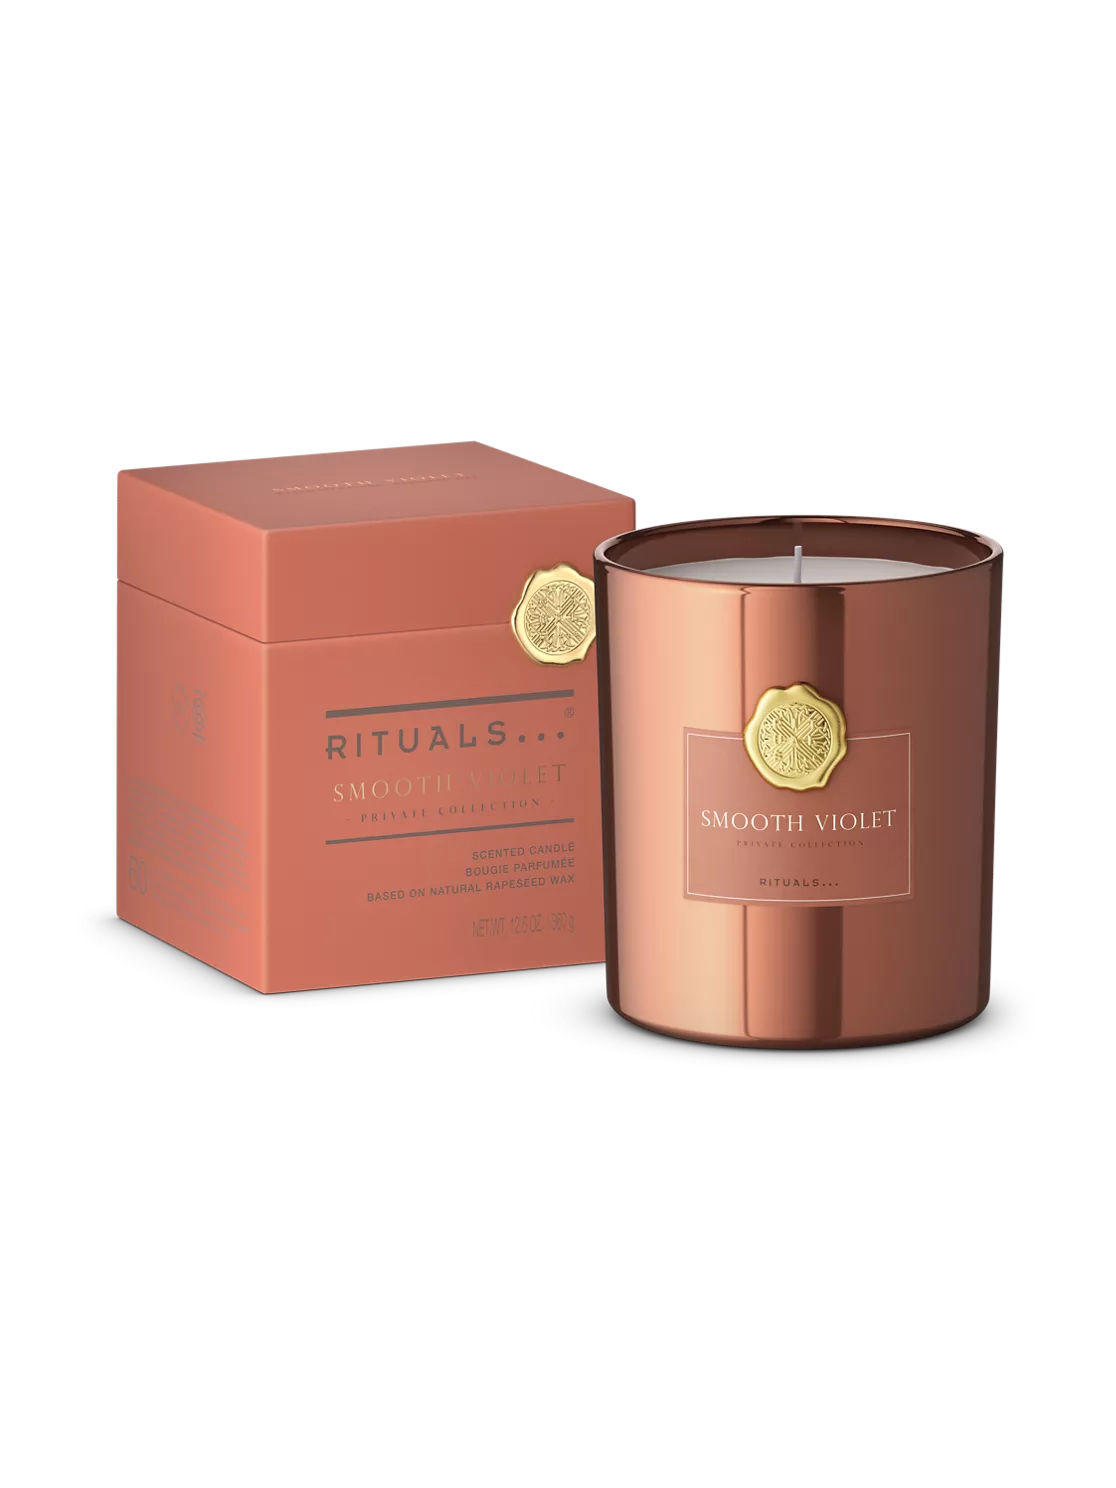 https://rituals.scene7.com/is/image/rituals/1116174-rituals-smooth-violet-scentedcandle-360g-pack-closed:3-by-4?fmt=webp-alpha&hei=1488&resMode=sharp2&wid=1116